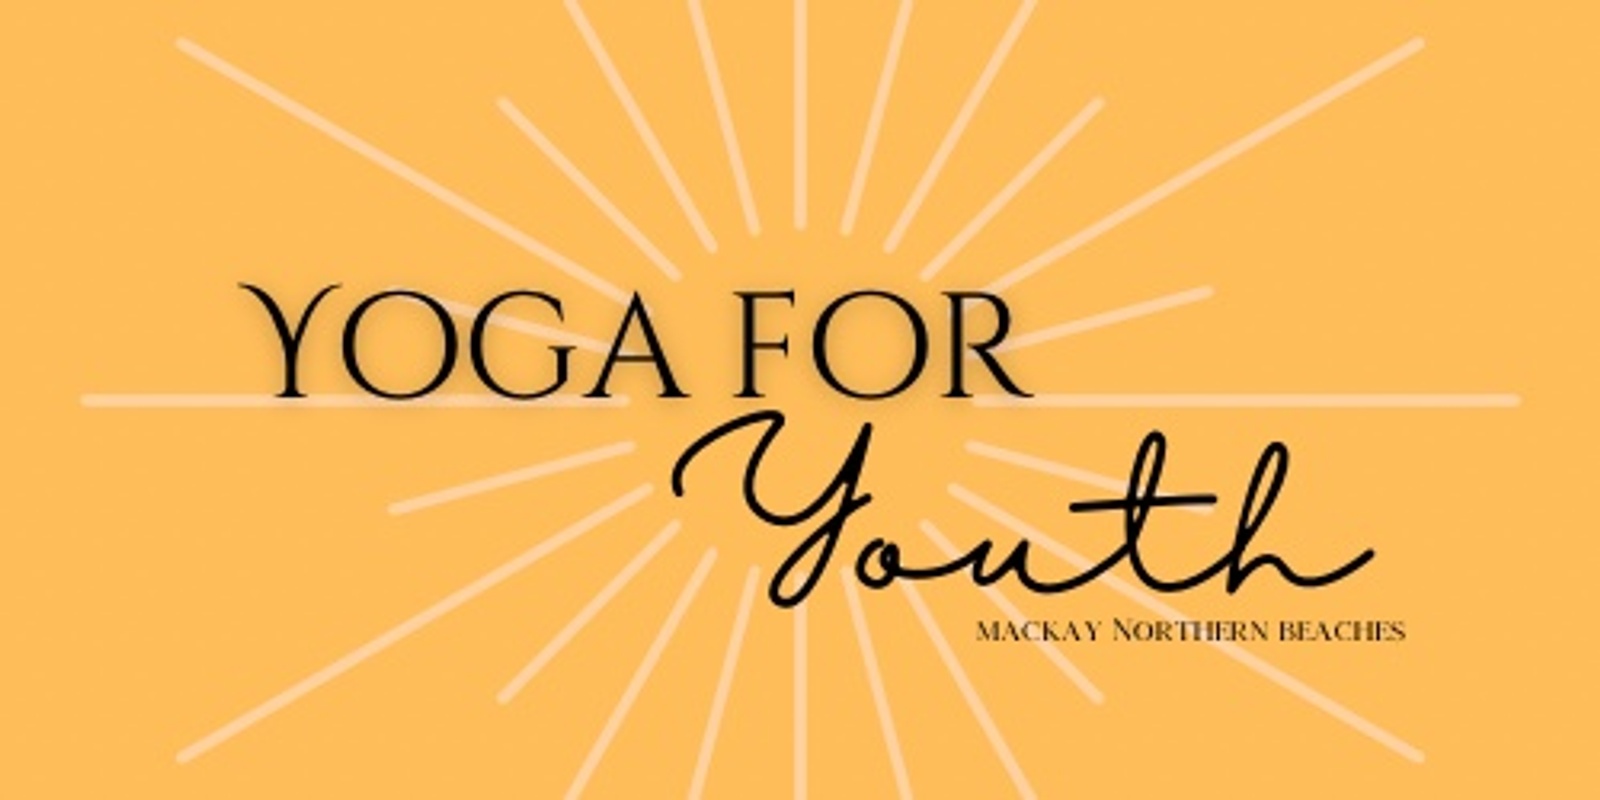 Banner image for Yoga for Youth - 11th April